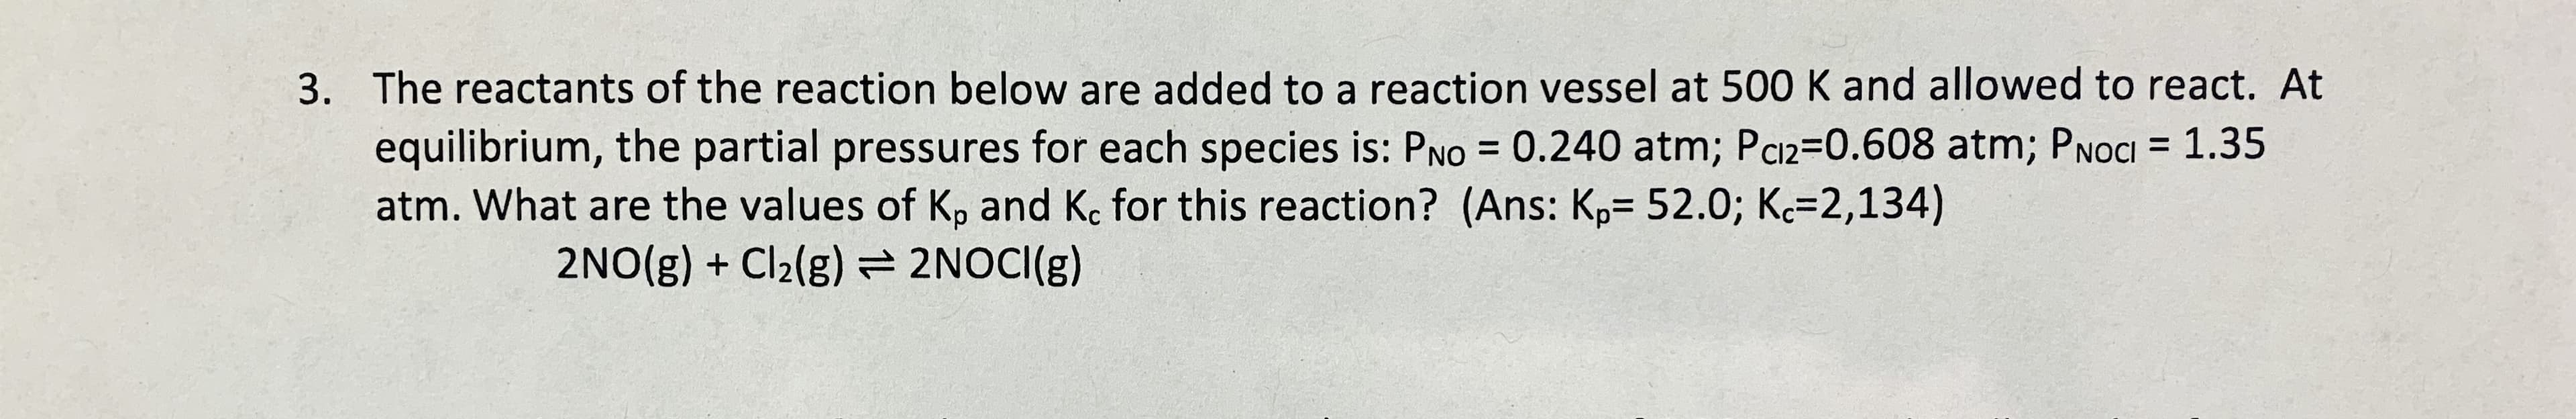 3. The reactants of the reaction below are added to a reaction vessel at 500 K and allowed to react. At
equilibrium, the partial pressures for each species is: PNo 0.240 atm; Pa2-0.608 atm; PNOCI 1.35
atm. What are the values of Kp and Kc for this reaction? (Ans: Kp- 52.0; K 2,134)
2NO(g) Cl2(g)2NOCI (g)
